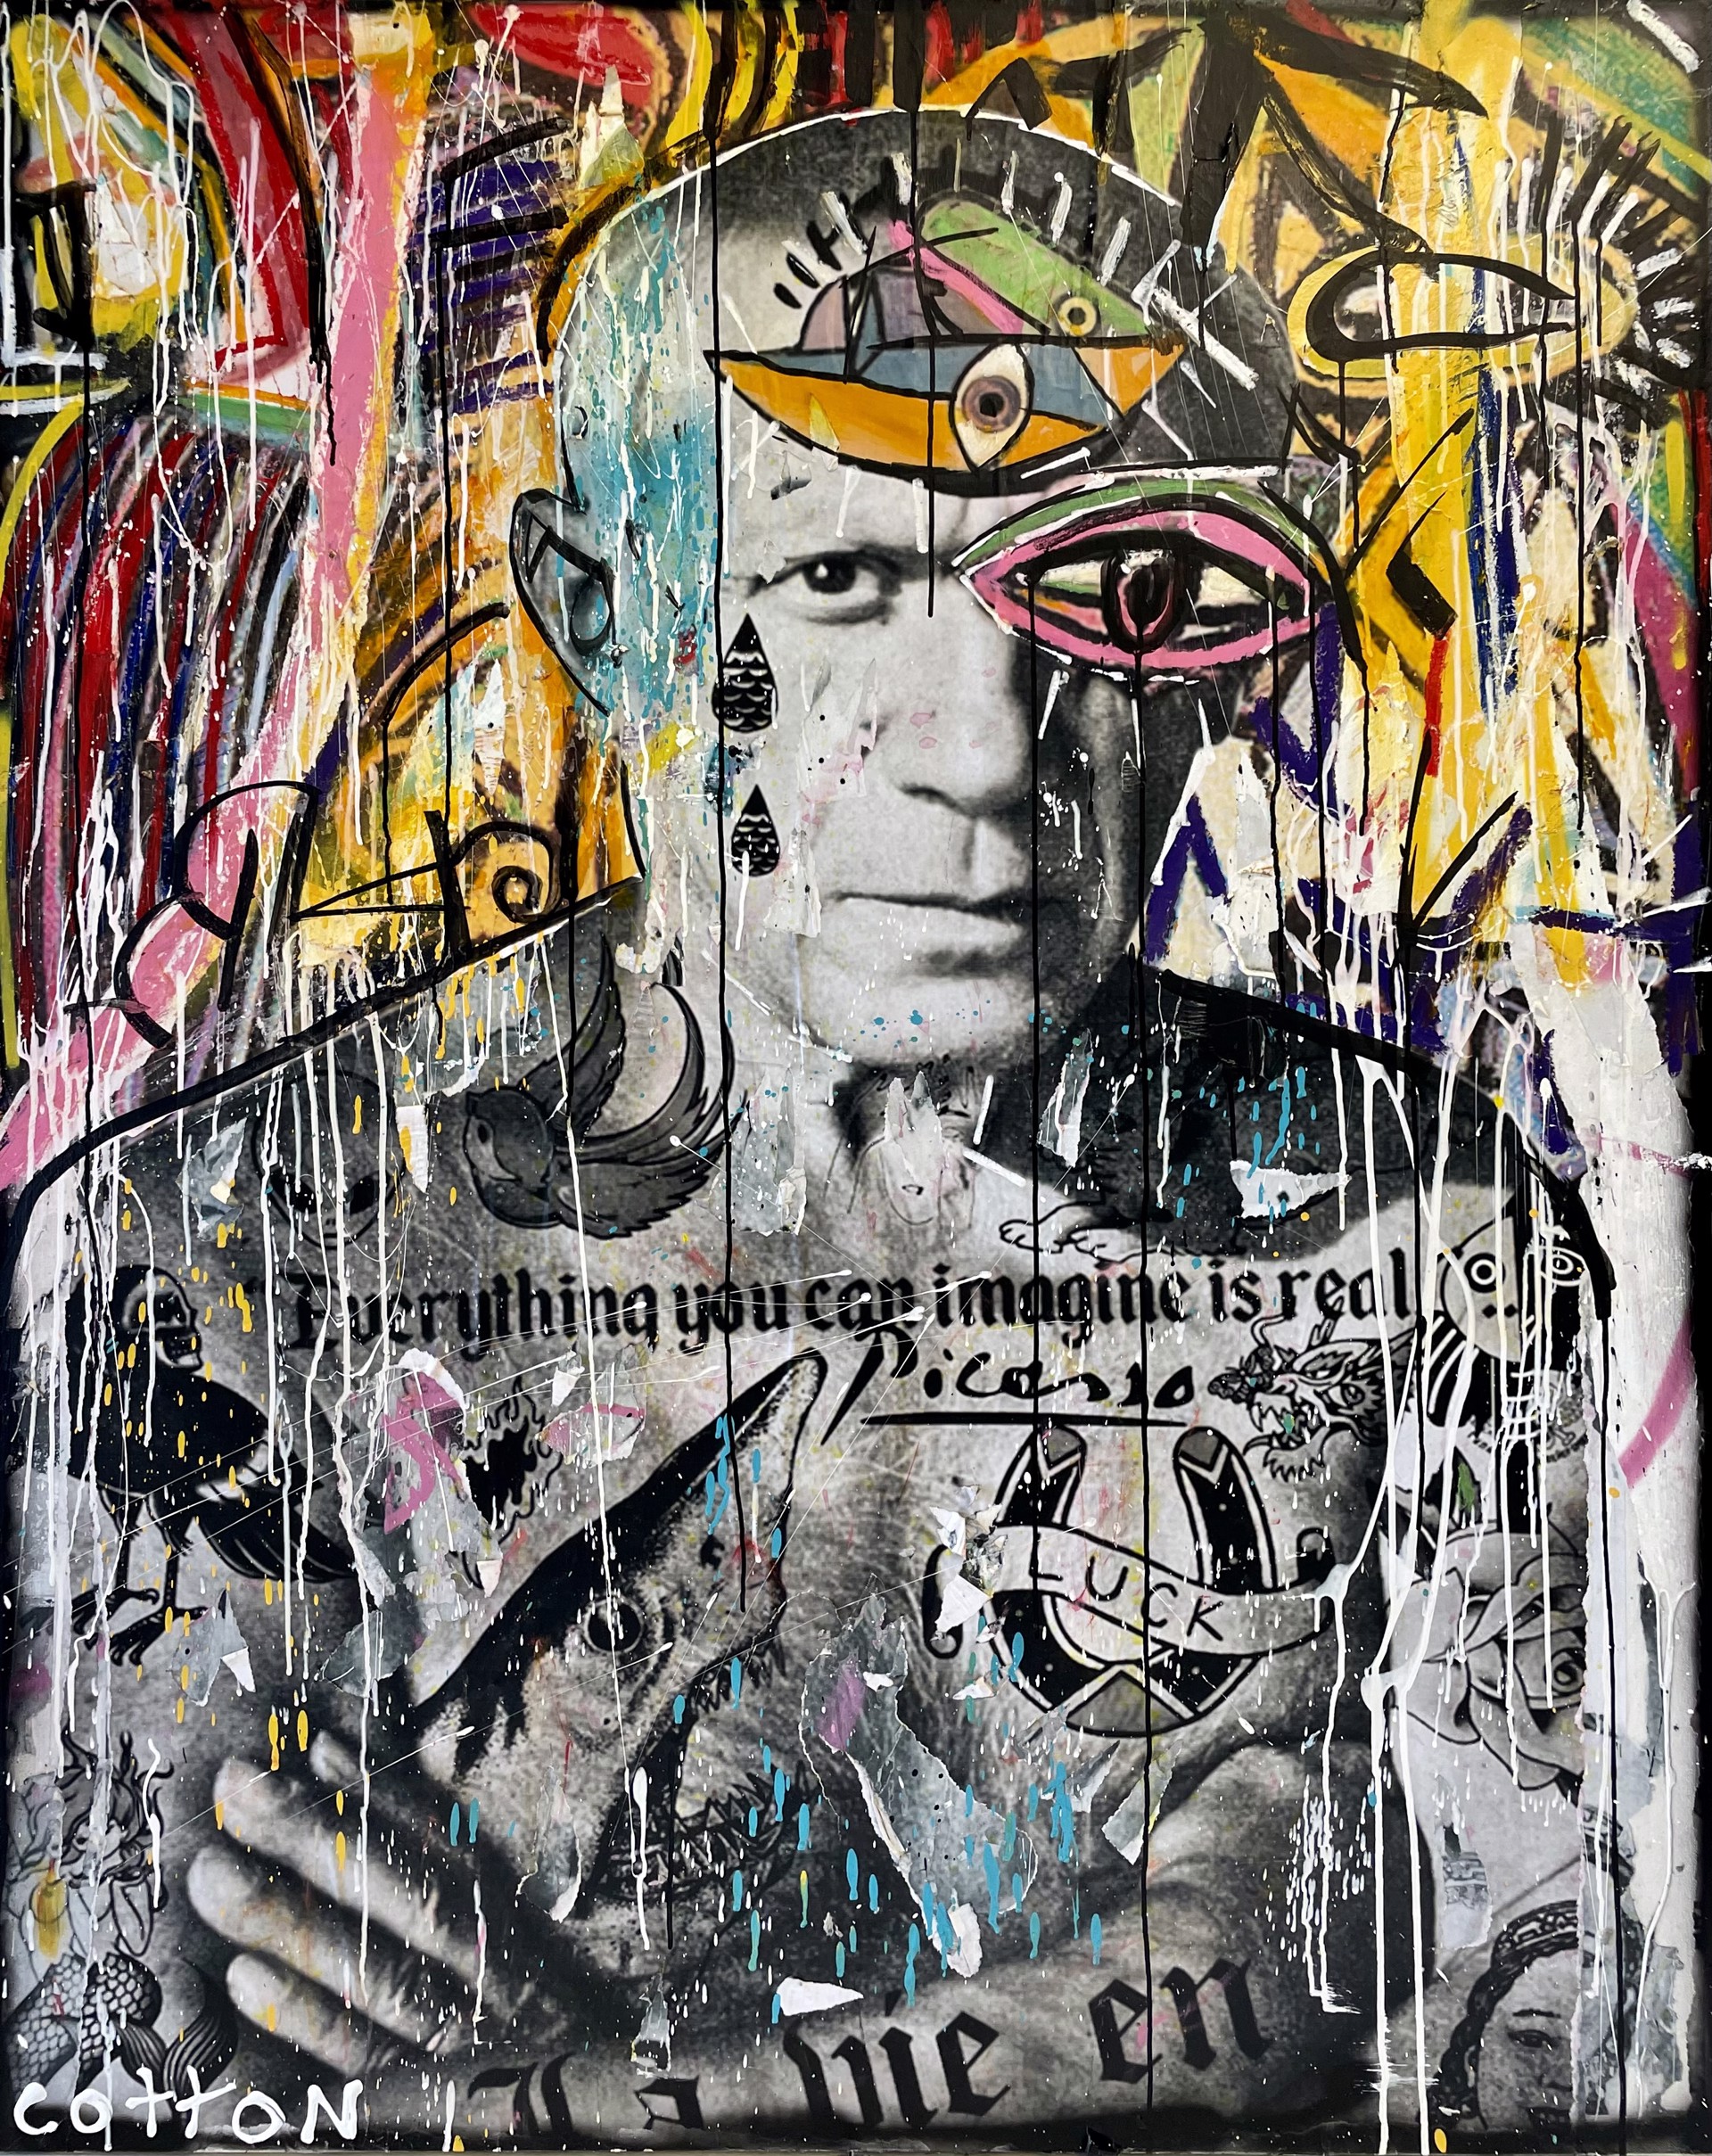 Pablo Picasso (Everything You Can Imagine Is Real) by Andrew Cotton